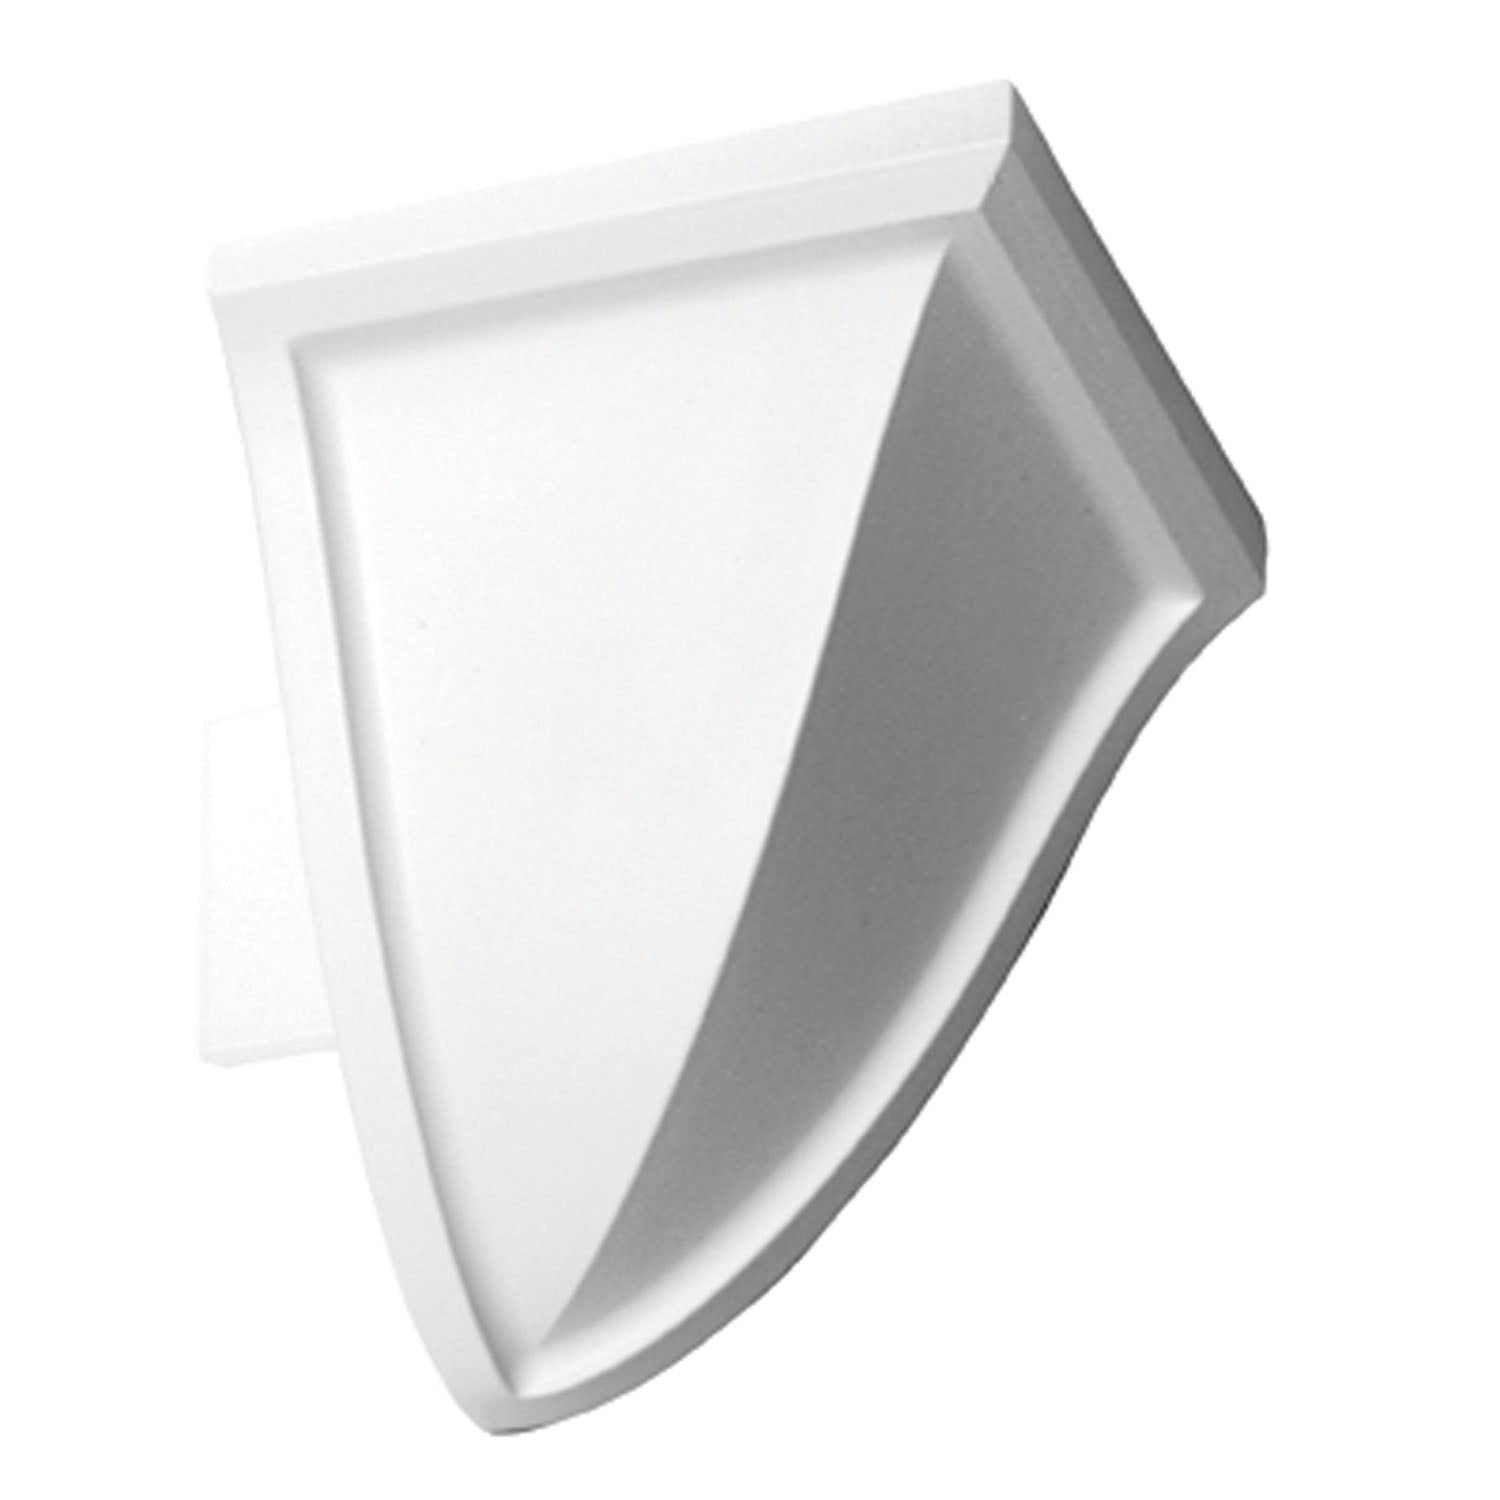 Focal Point Lighting 21605 Accessories 5 7/8 Quick Clips System B Outside Corner Block Decor White